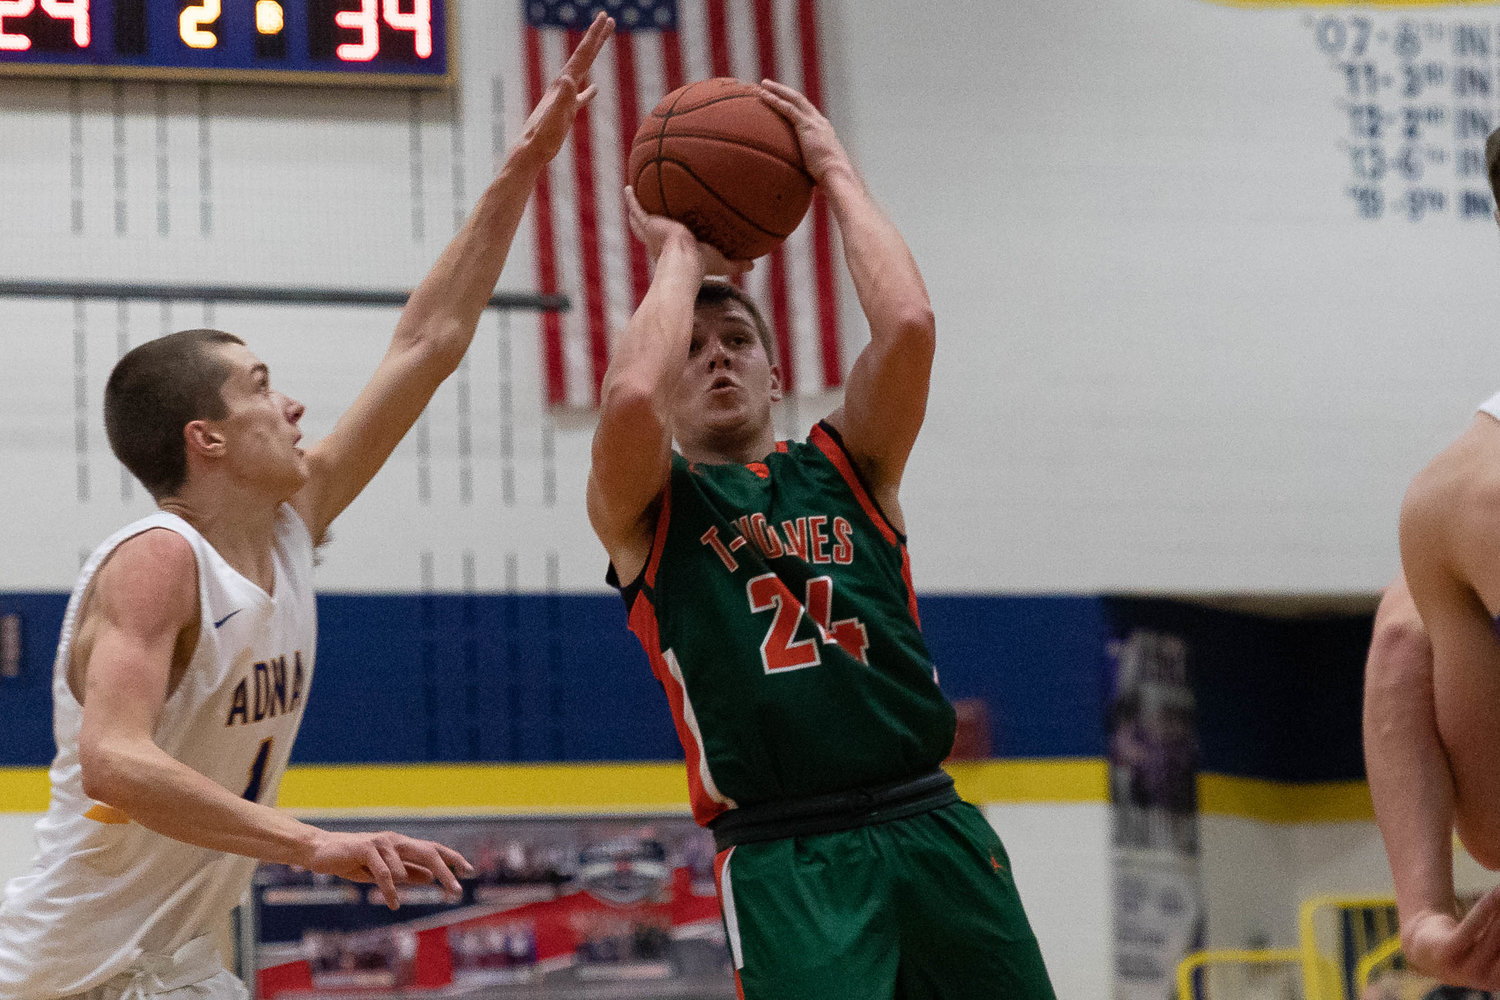 MWP guard Carter Dantinne takes an off-balance jumper at the end of the first half against Adna Jan. 28.